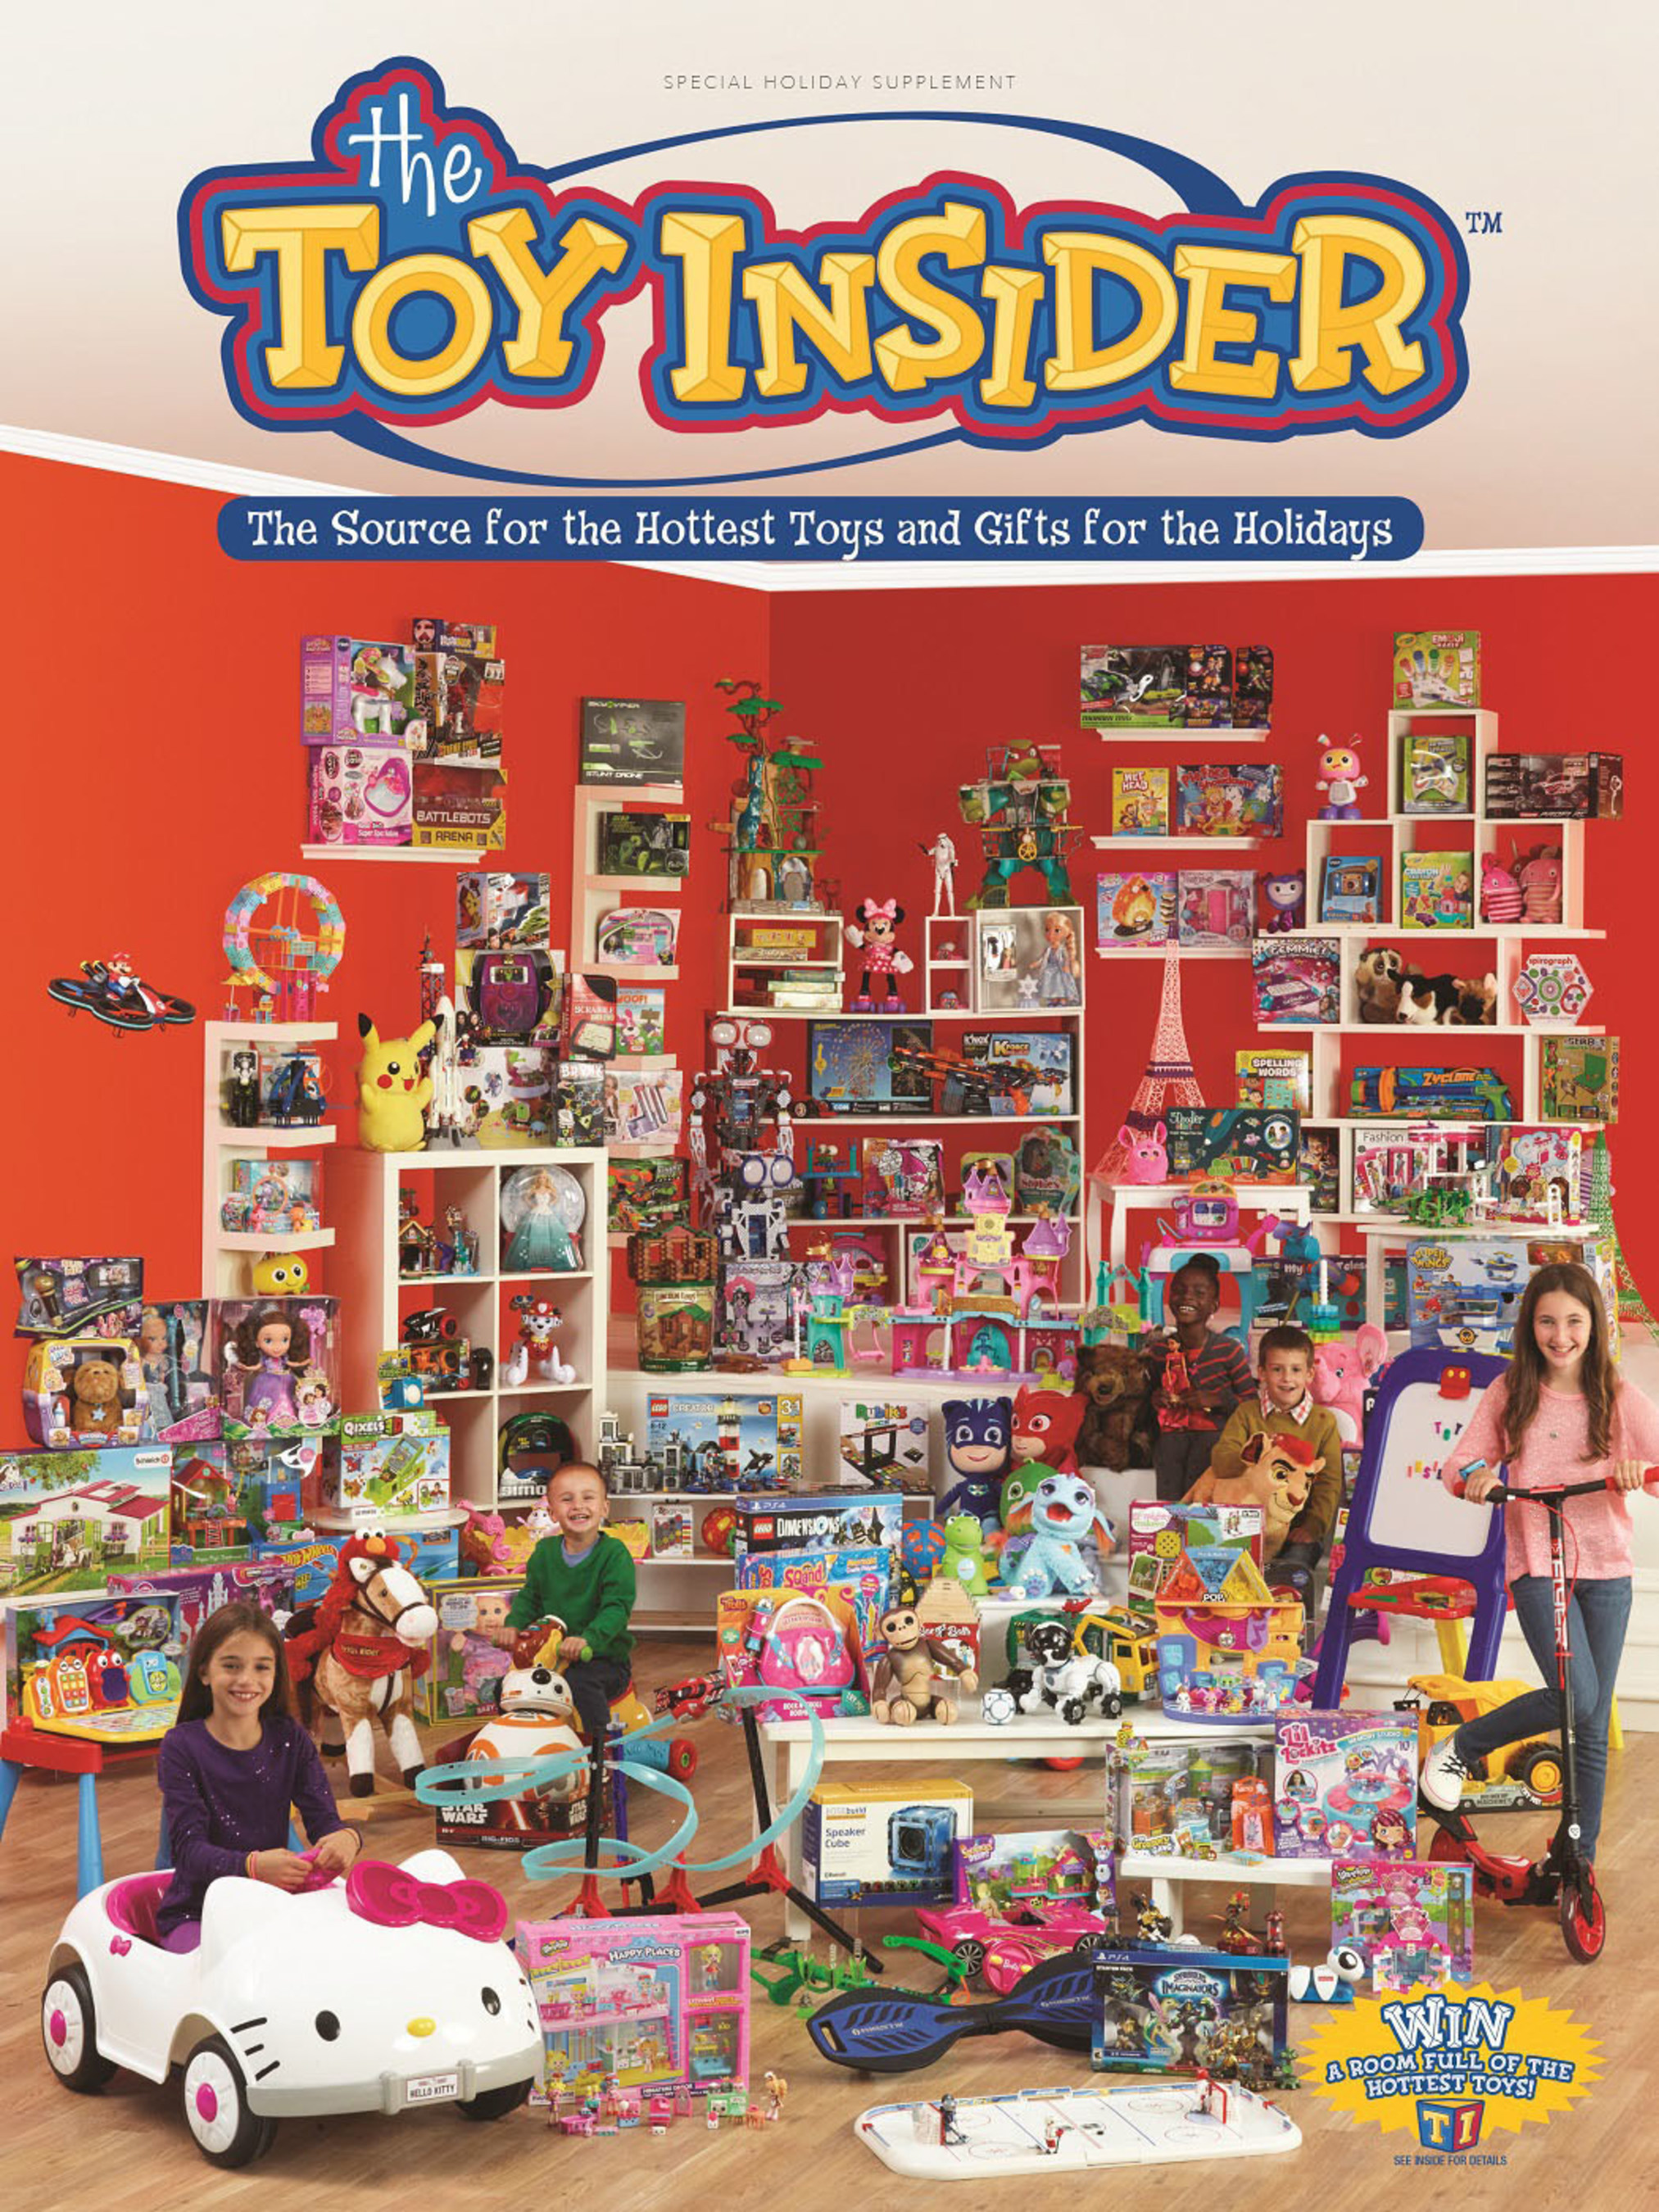 The Toy Insider's 2016 holiday gift guide will appear in the November issue of Family Circle magazine, on newsstands on October 11th, and online at thetoyinsider.com. This year's guide is the biggest ever, featuring more than 275 toys from more than 110 manufacturers.